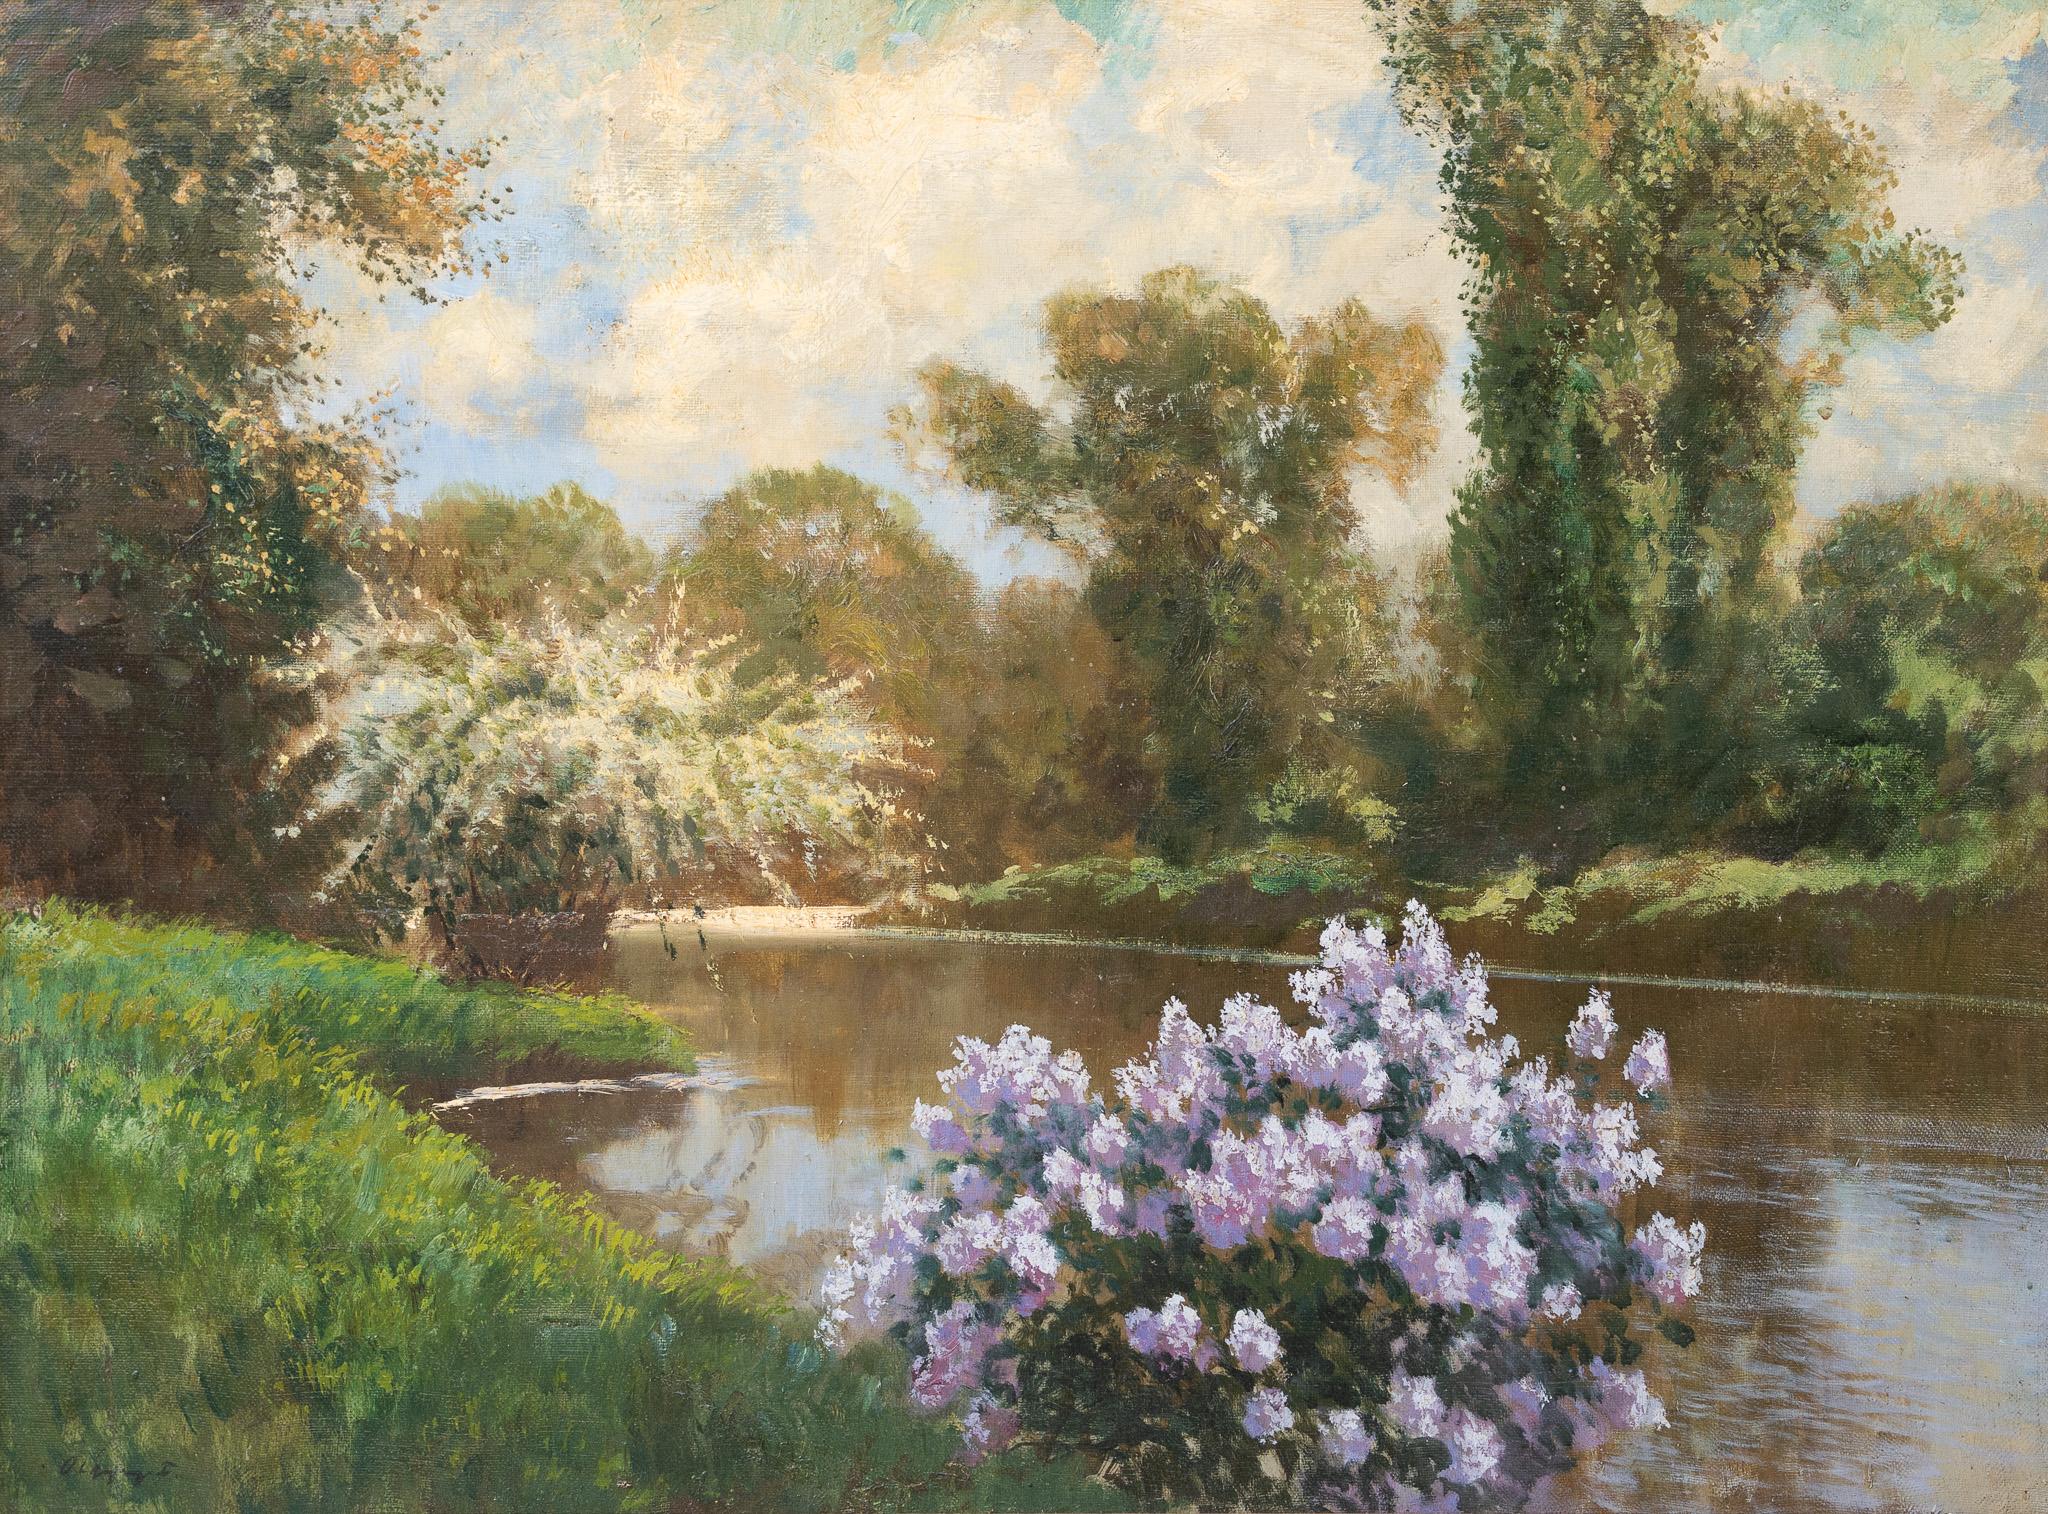 Ferenc Olgyay Landscape Painting - "Landscape with Purple Flowers" 